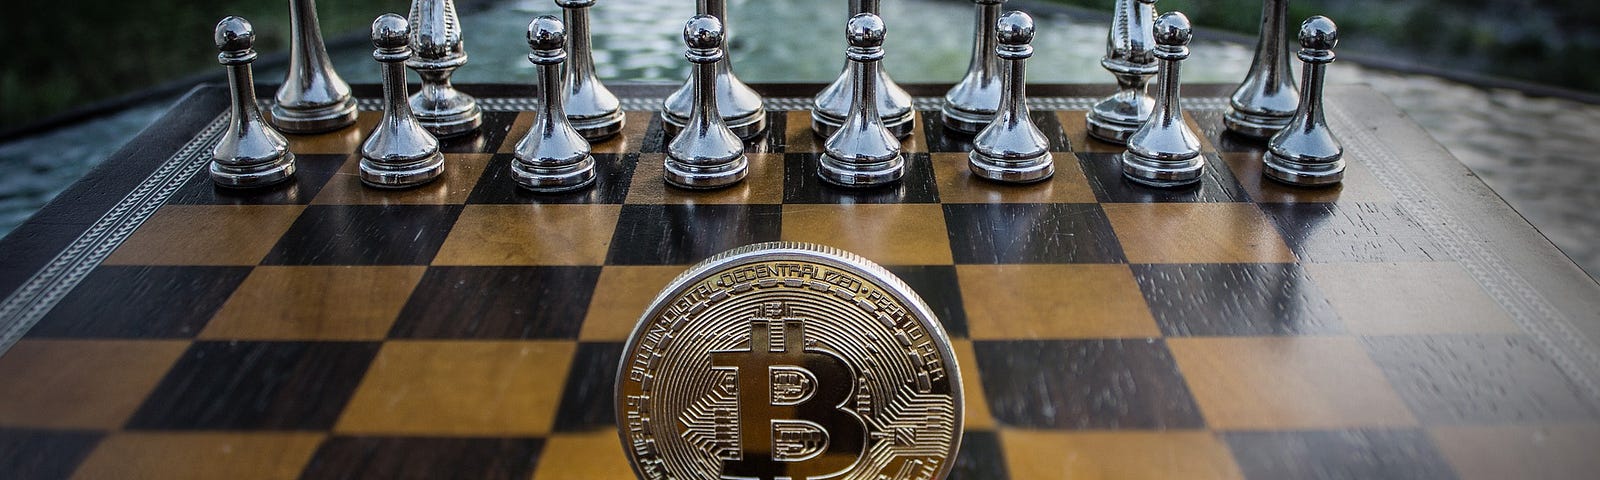 A metal coin with the Bitcoin logo standing on its edge in the middle of a chess board